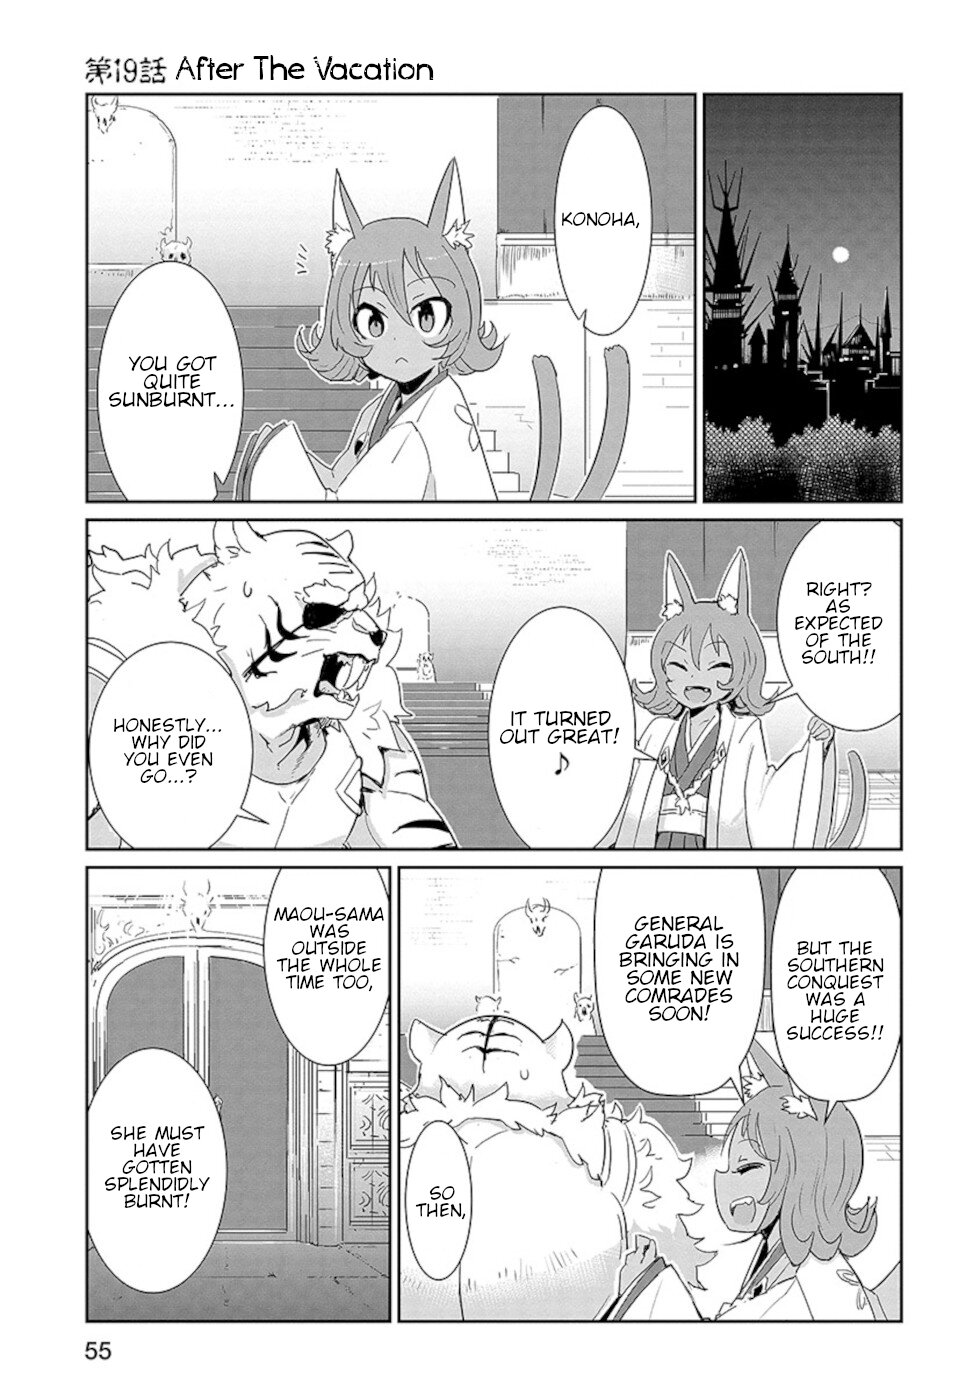 Don't Cry Maou chan Vol. 3 Ch. 19 After THe Vacation